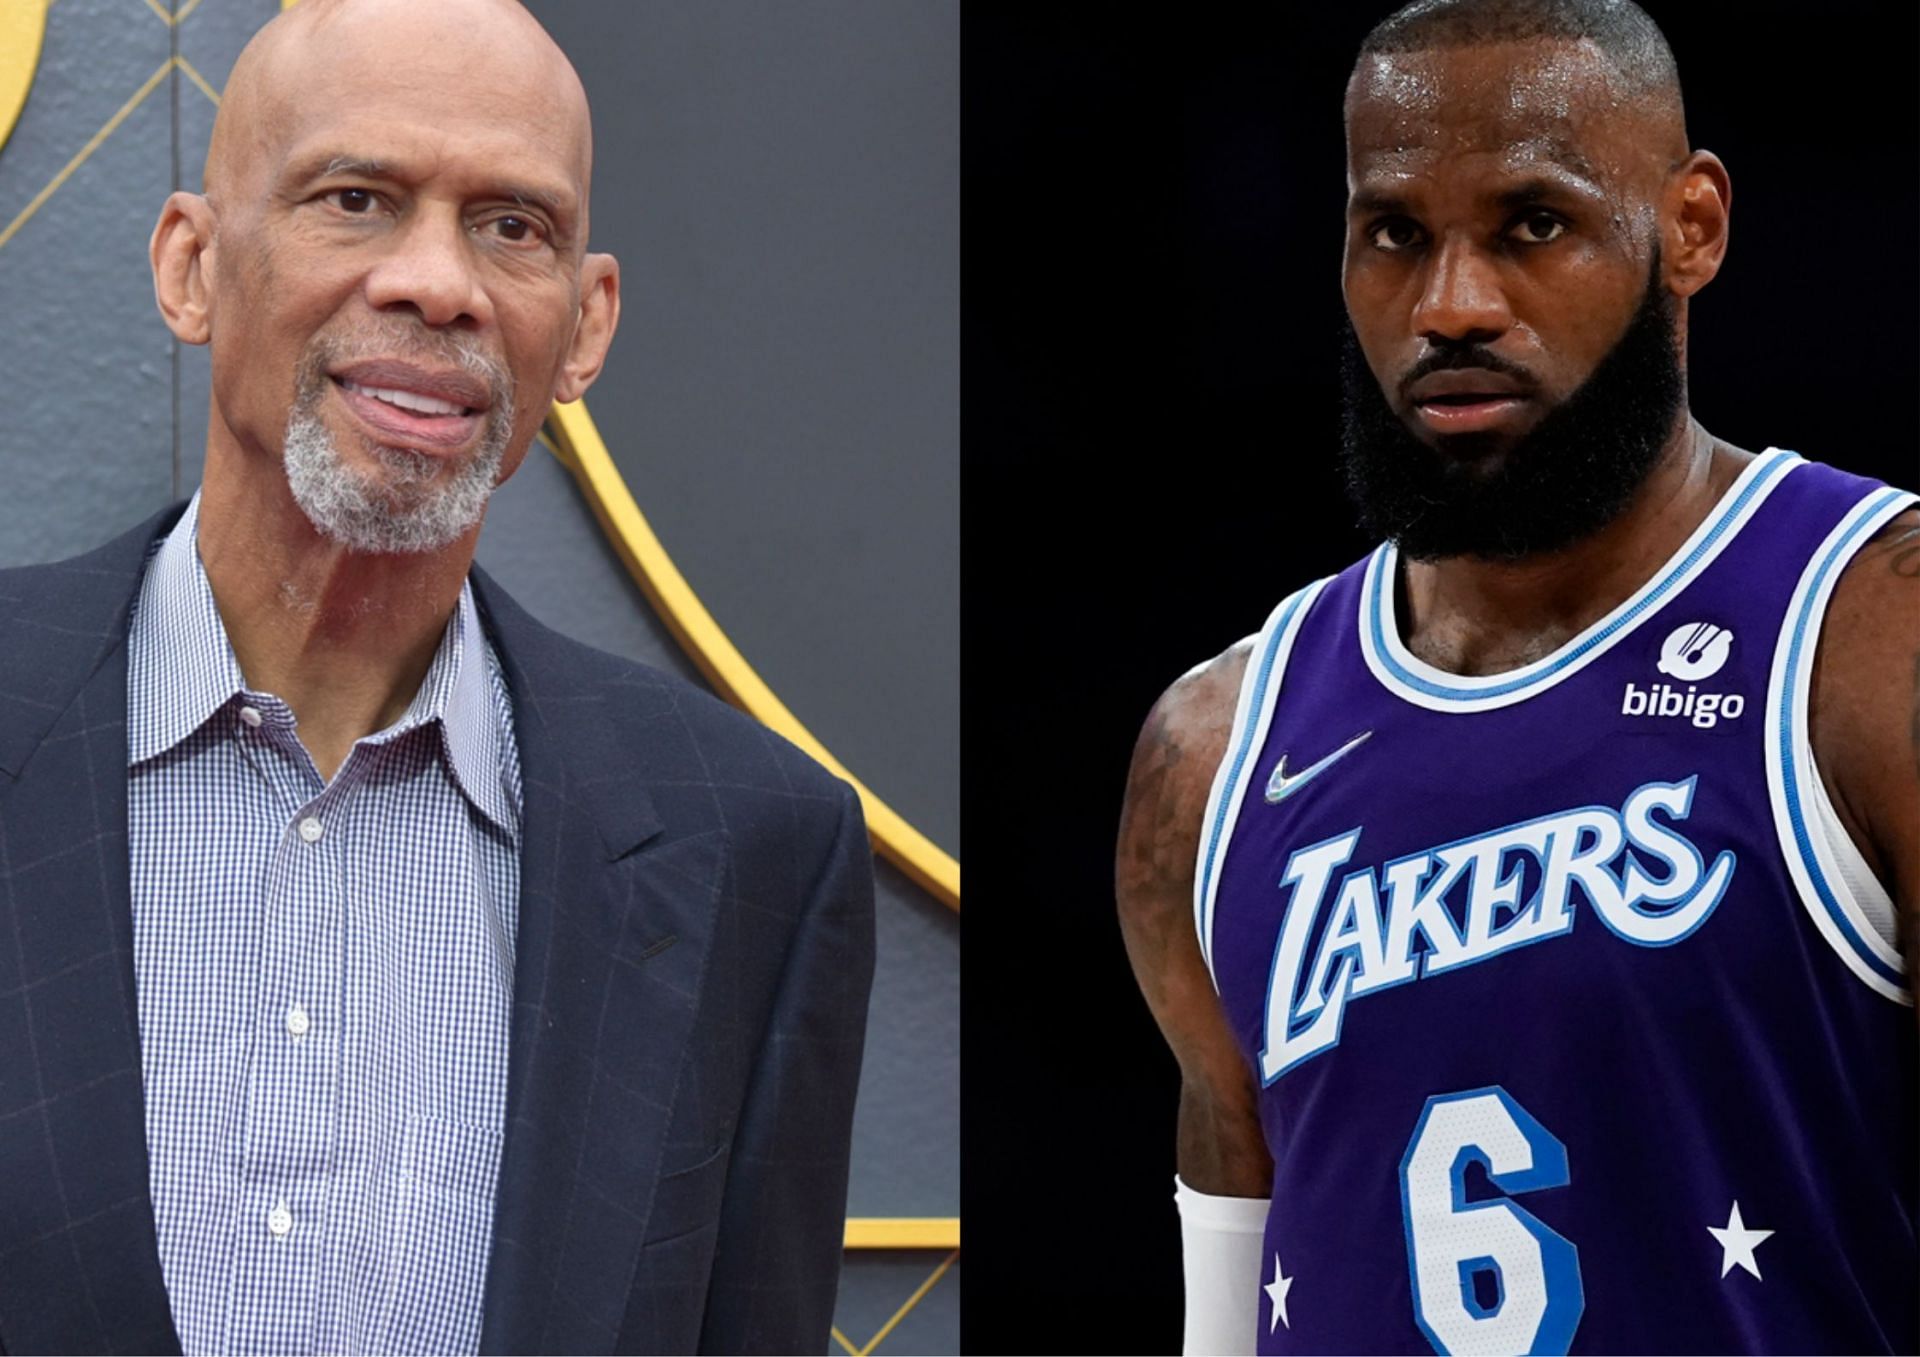 LeBron James gives an emphatic answer when asked about chasing Kareem Abdul-Jabbar’s record